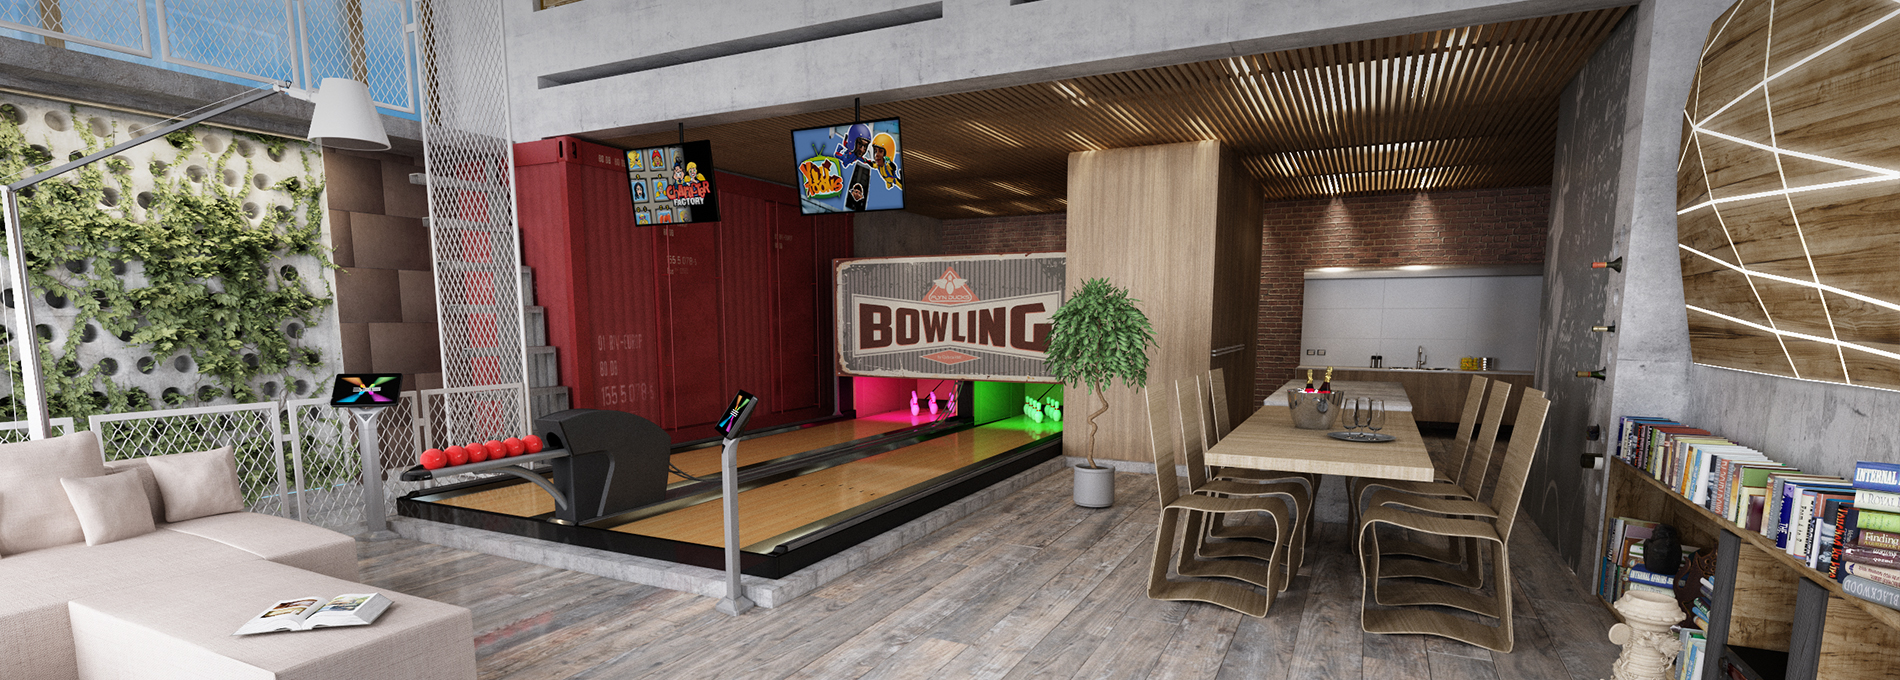 qubicaamf-bowling-home 3 banner